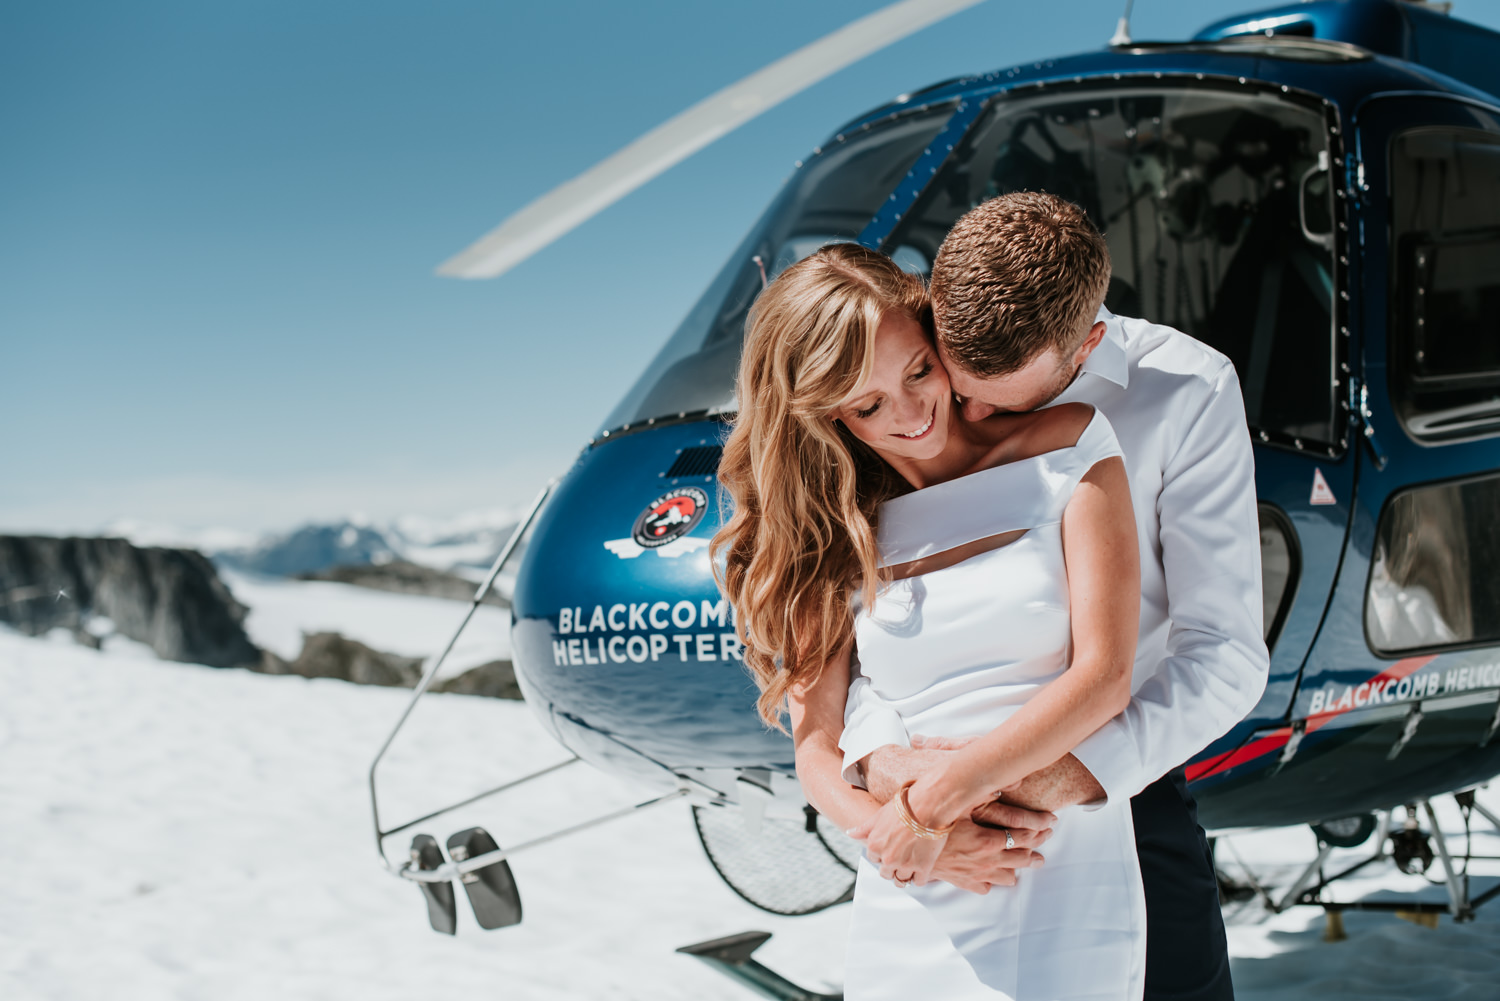 Blackcomb Helicopters in Whistler BC